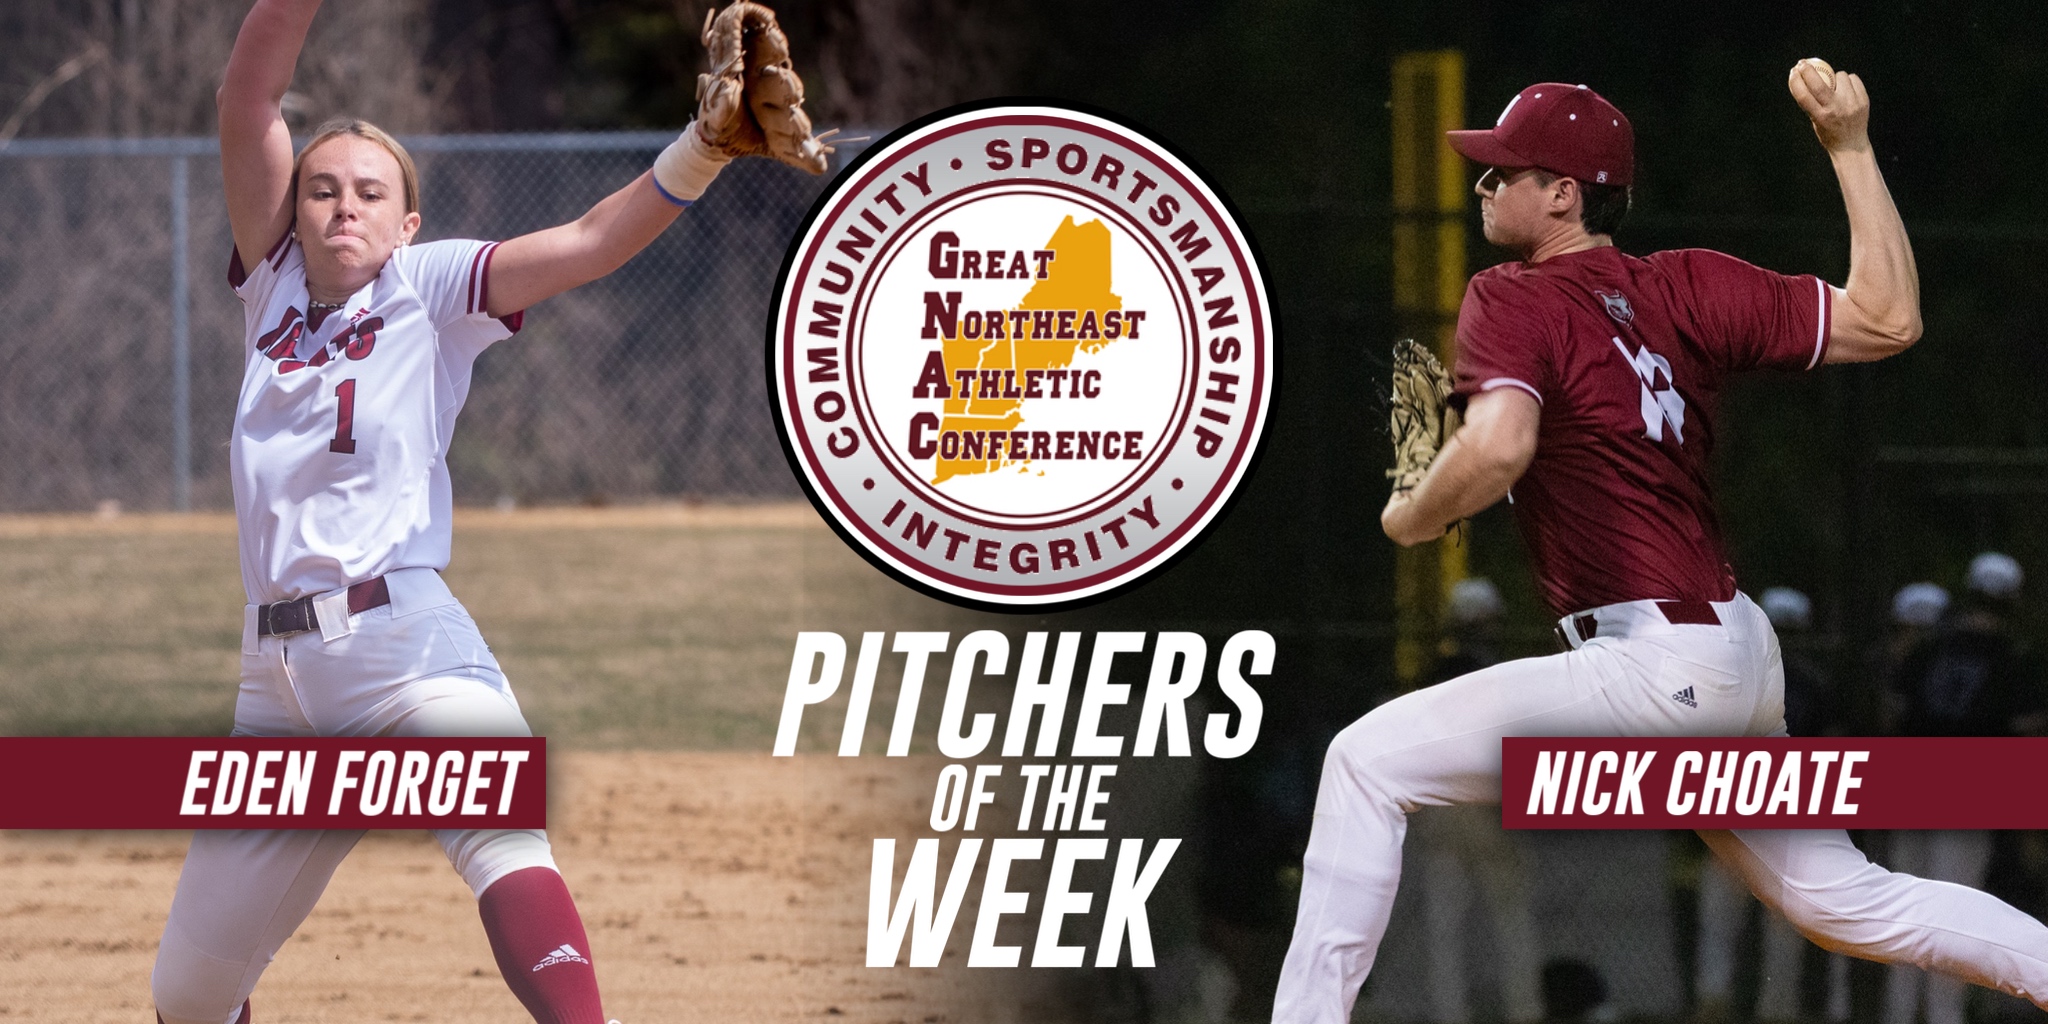 Choate And Forget Named GNAC Pitchers Of The Week